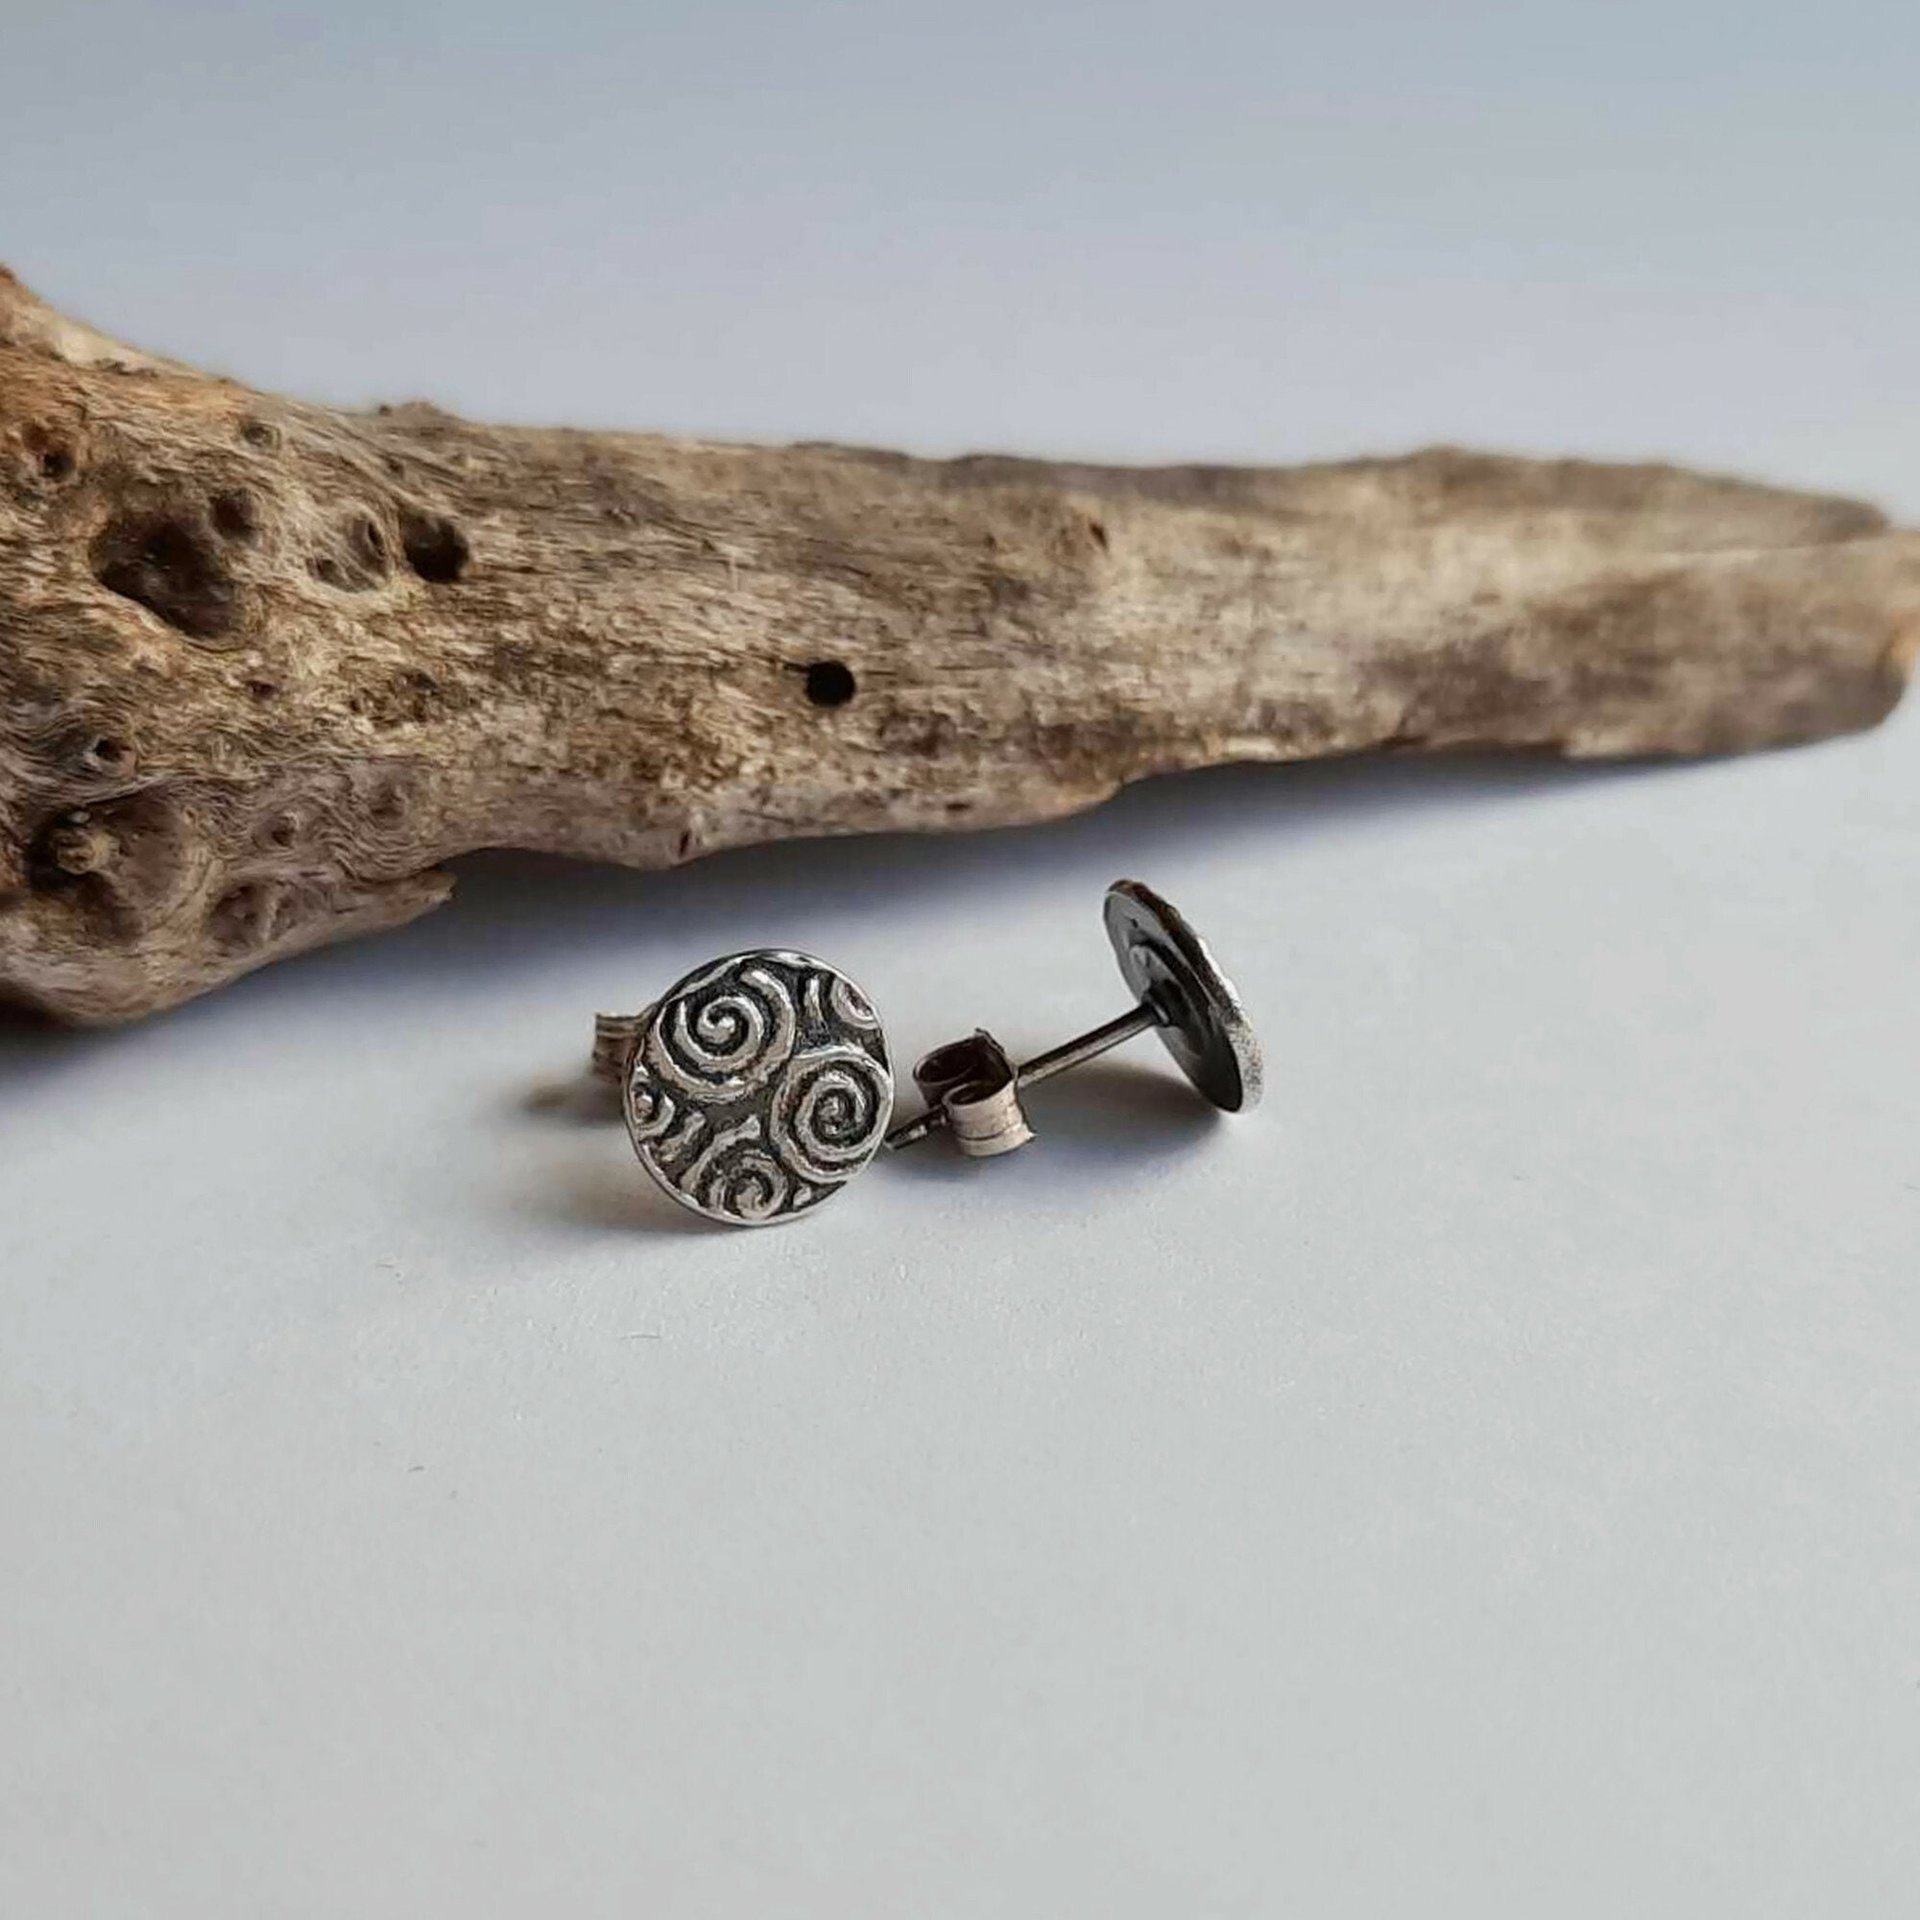 Oxidised Fine Silver and Sterling Silver Spiral Pattern Stud Earrings ~ Handmade by The Tiny Tree Frog Jewellery